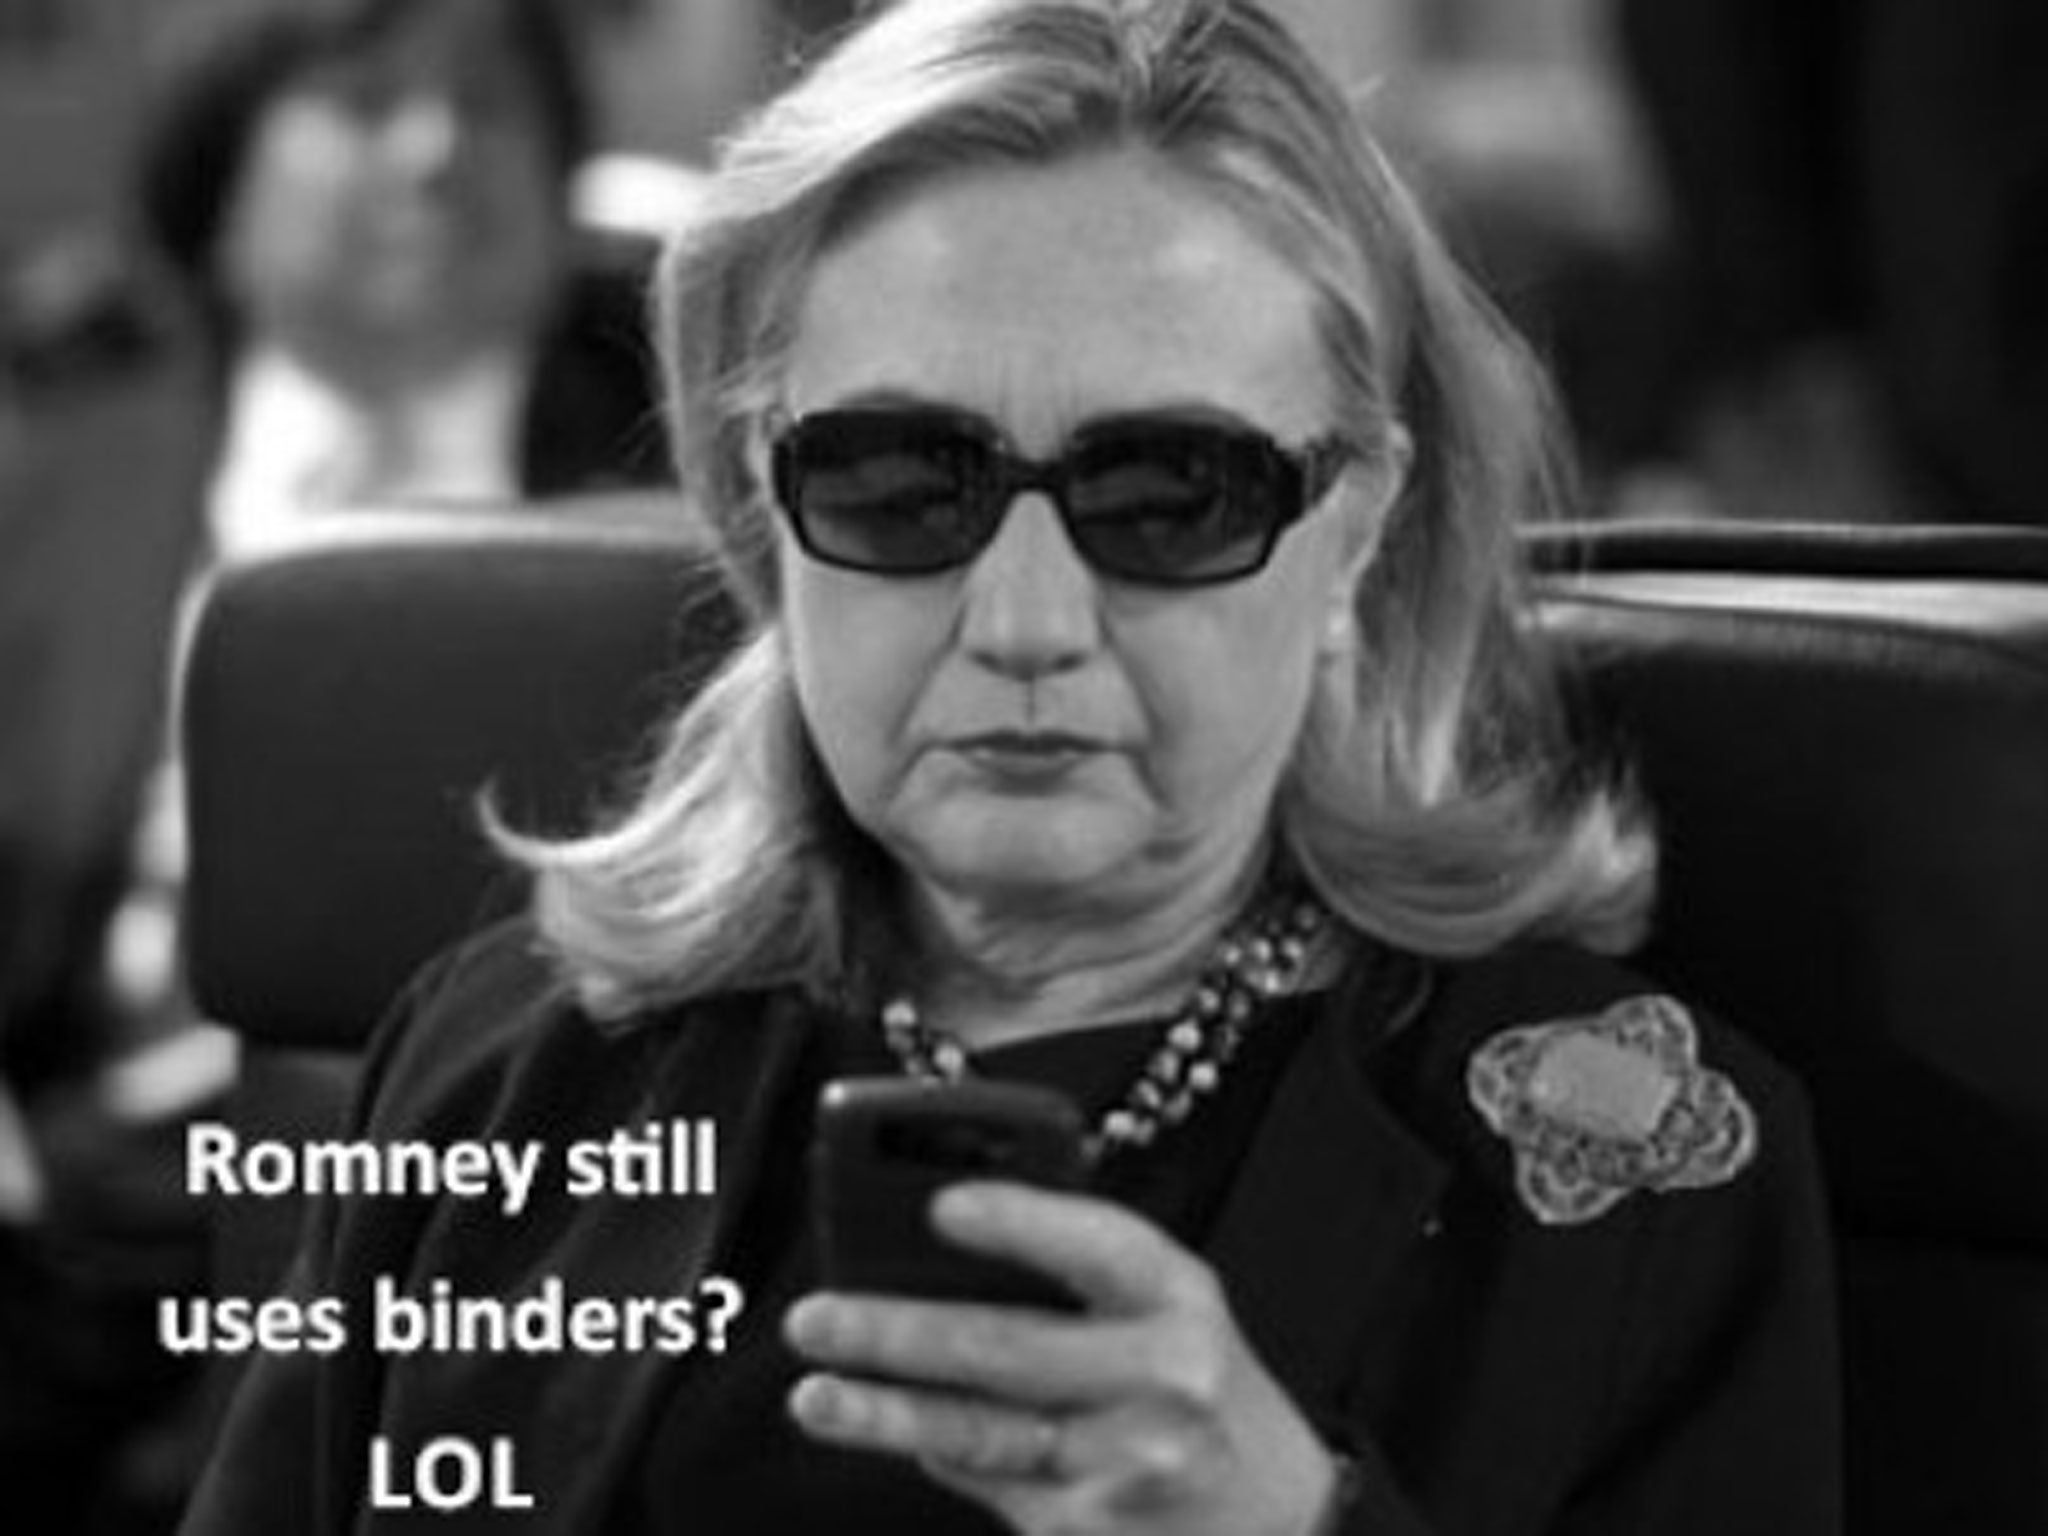 Texts from Hillary / Binder meme